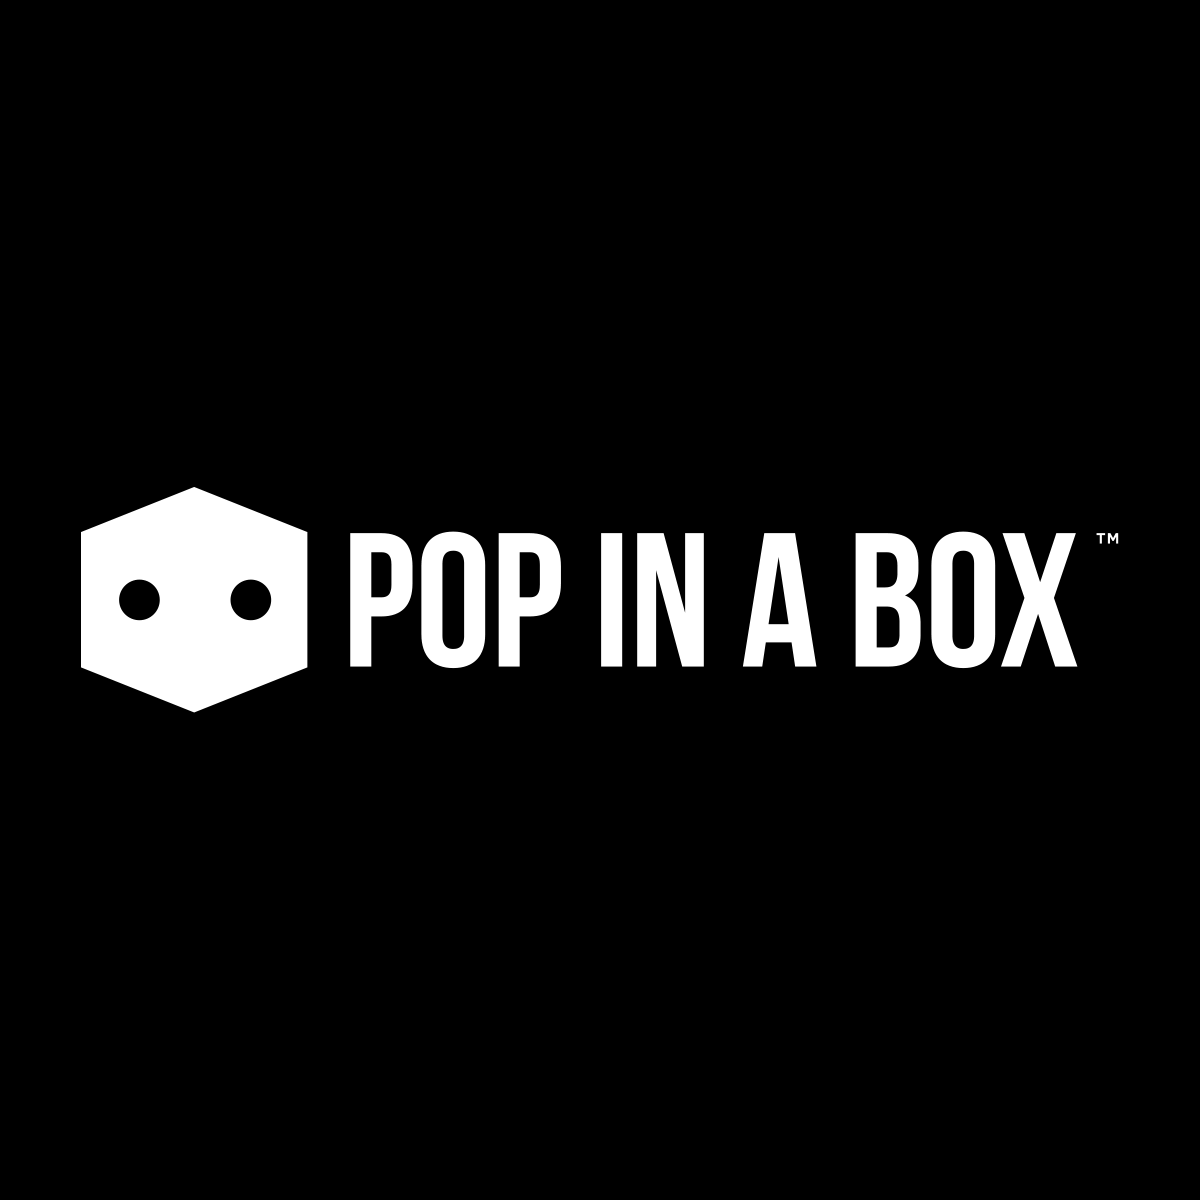 10% Off With Pop In A Box UK Coupon